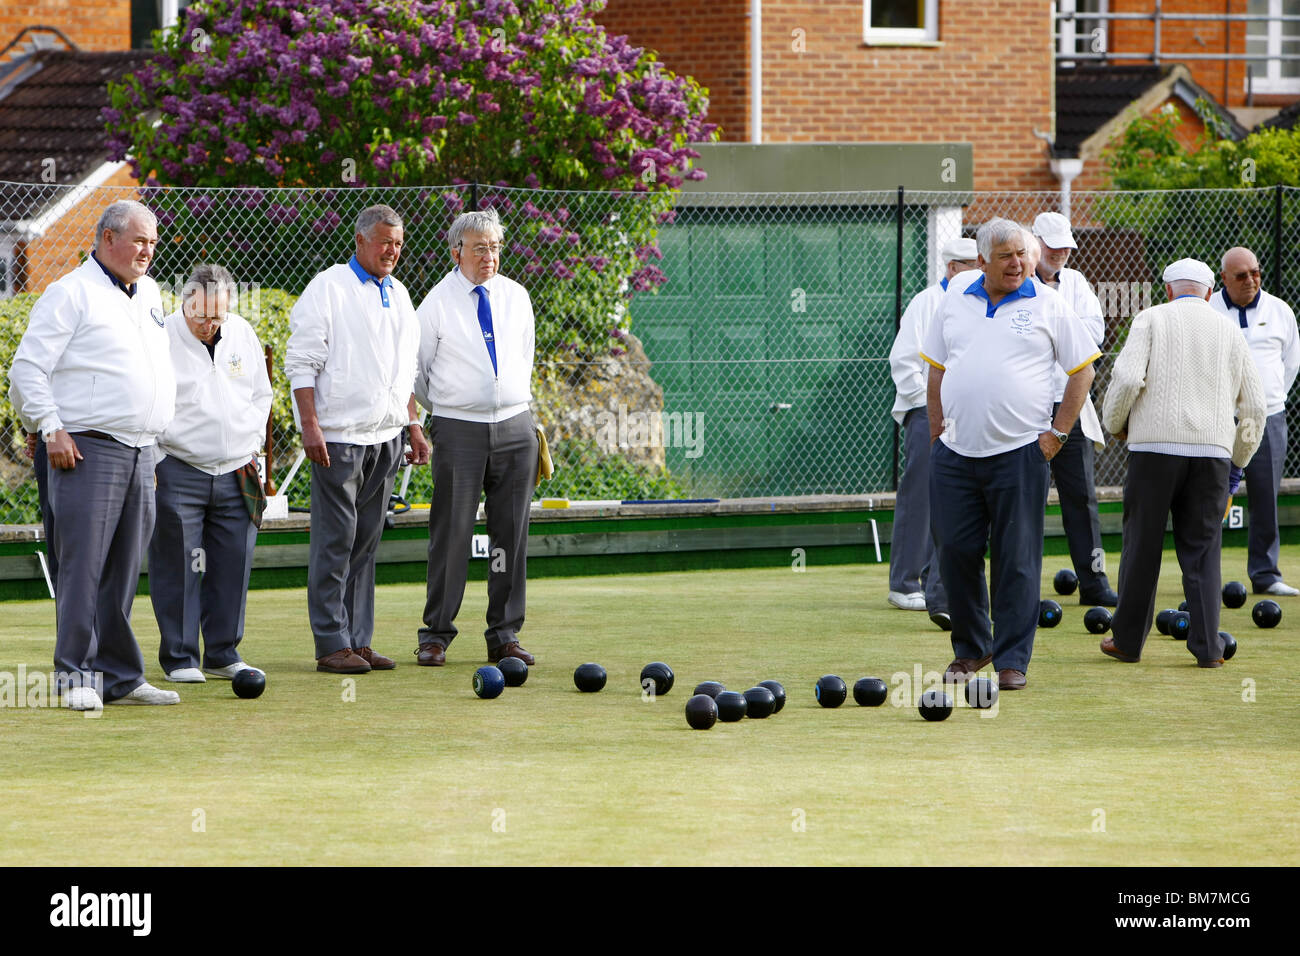 A Crown Green Bowls evening tournament - A nice sedate game for retired people but a very competitive sport played by all ages. Stock Photo